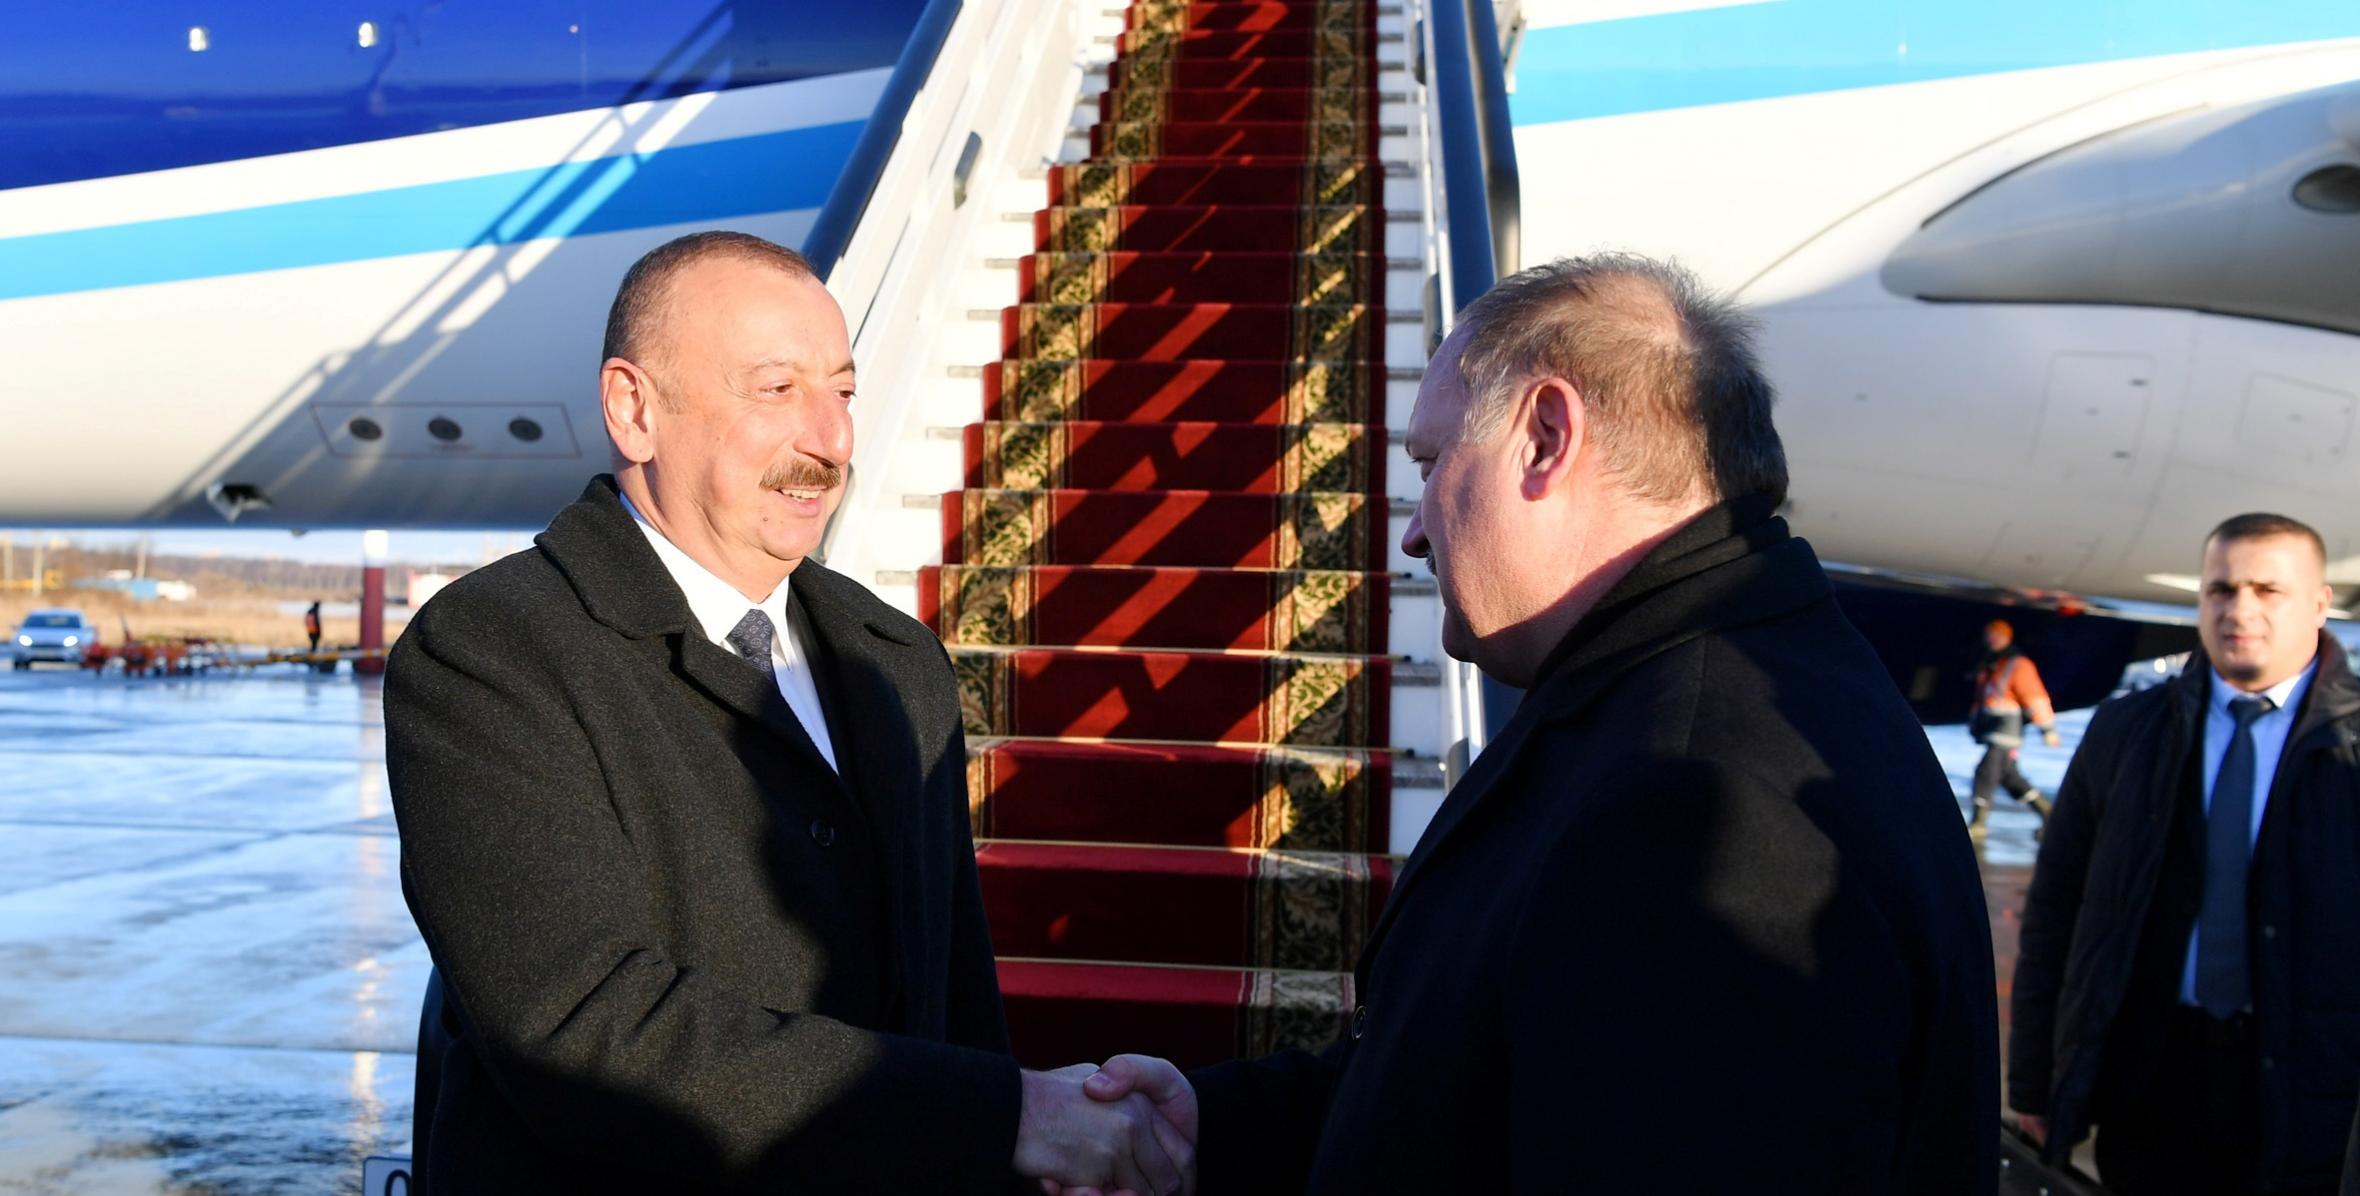 Ilham Aliyev arrived in Russia for working visit